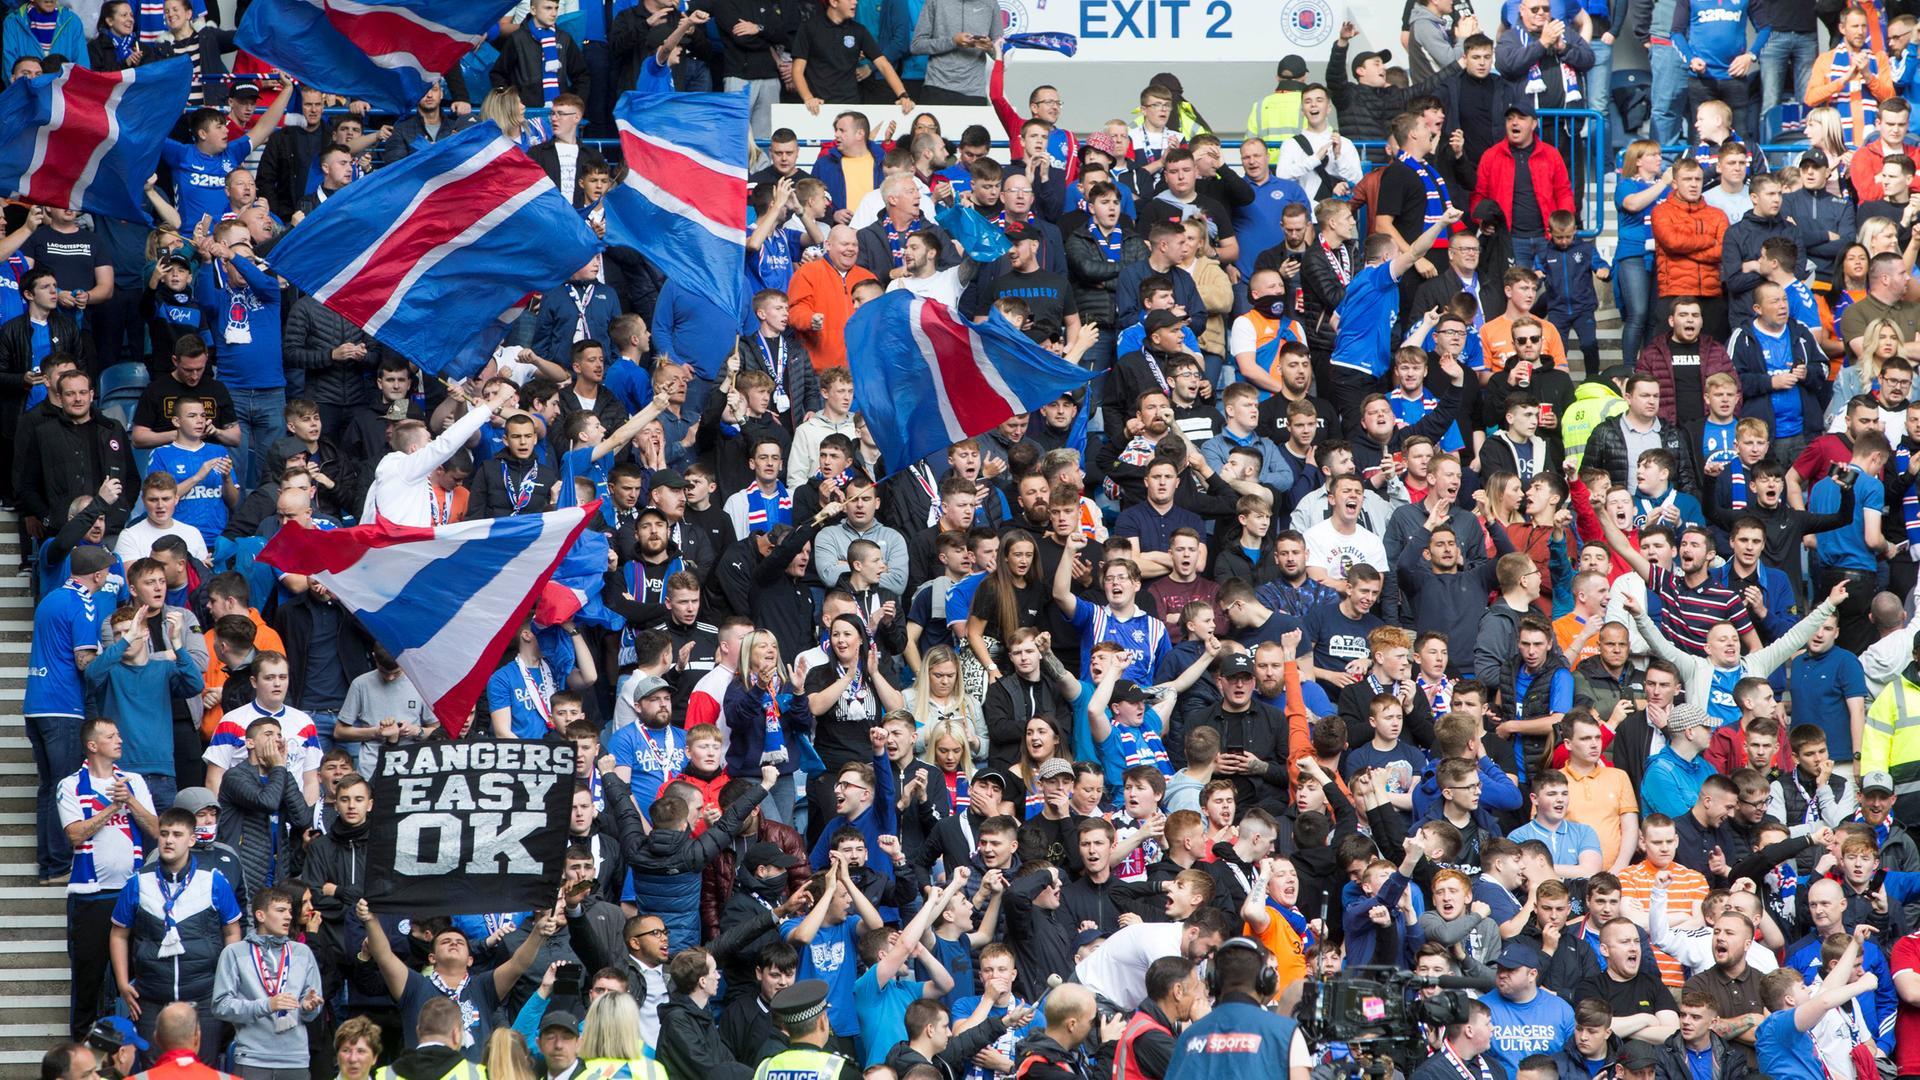 Rangers Fans Will Be Hoping To See The Team start Their - Crowd - HD Wallpaper 